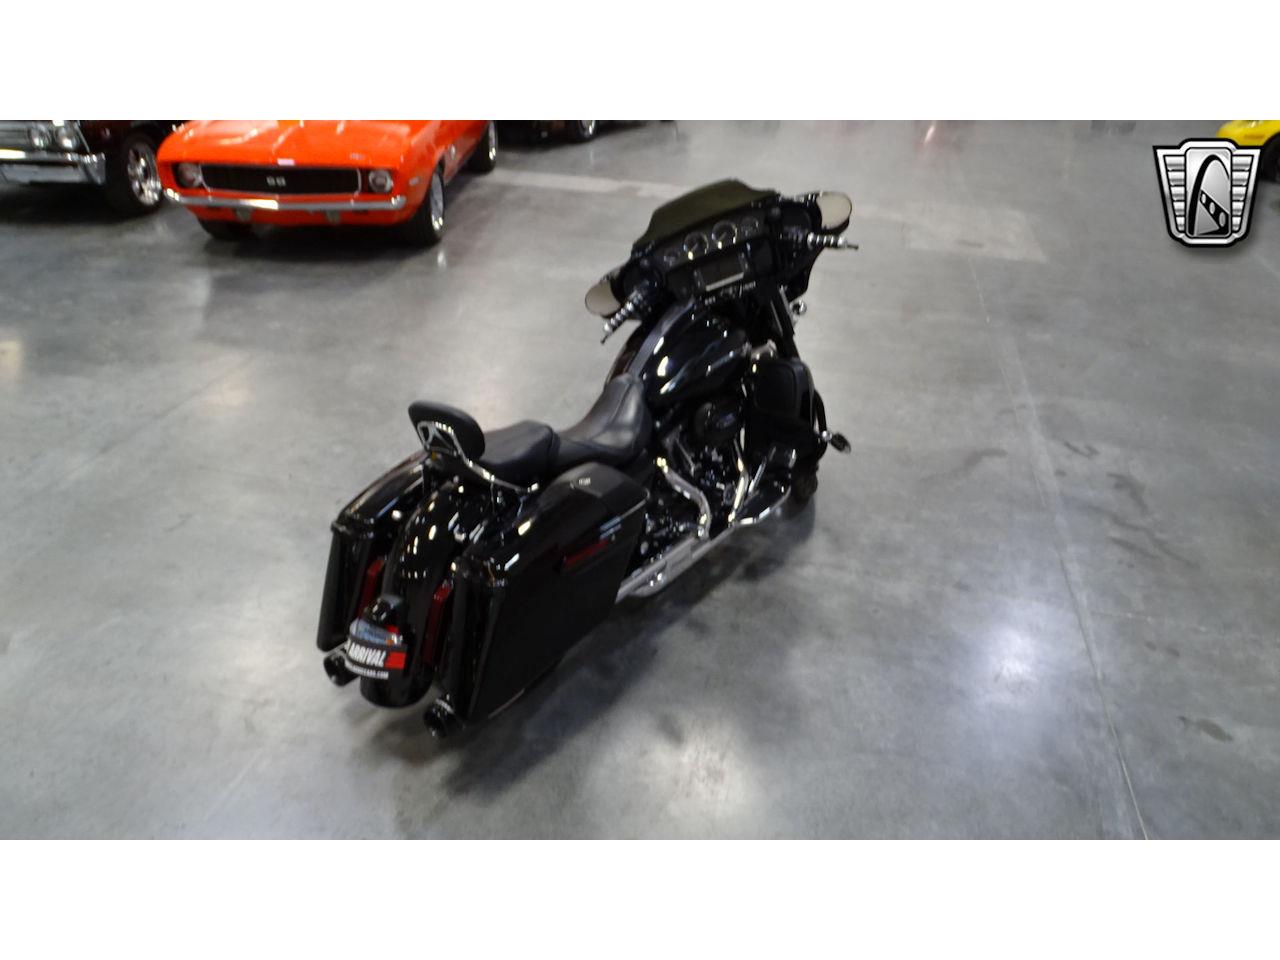 2015 Harley-Davidson Motorcycle for sale in O'Fallon, IL – photo 36